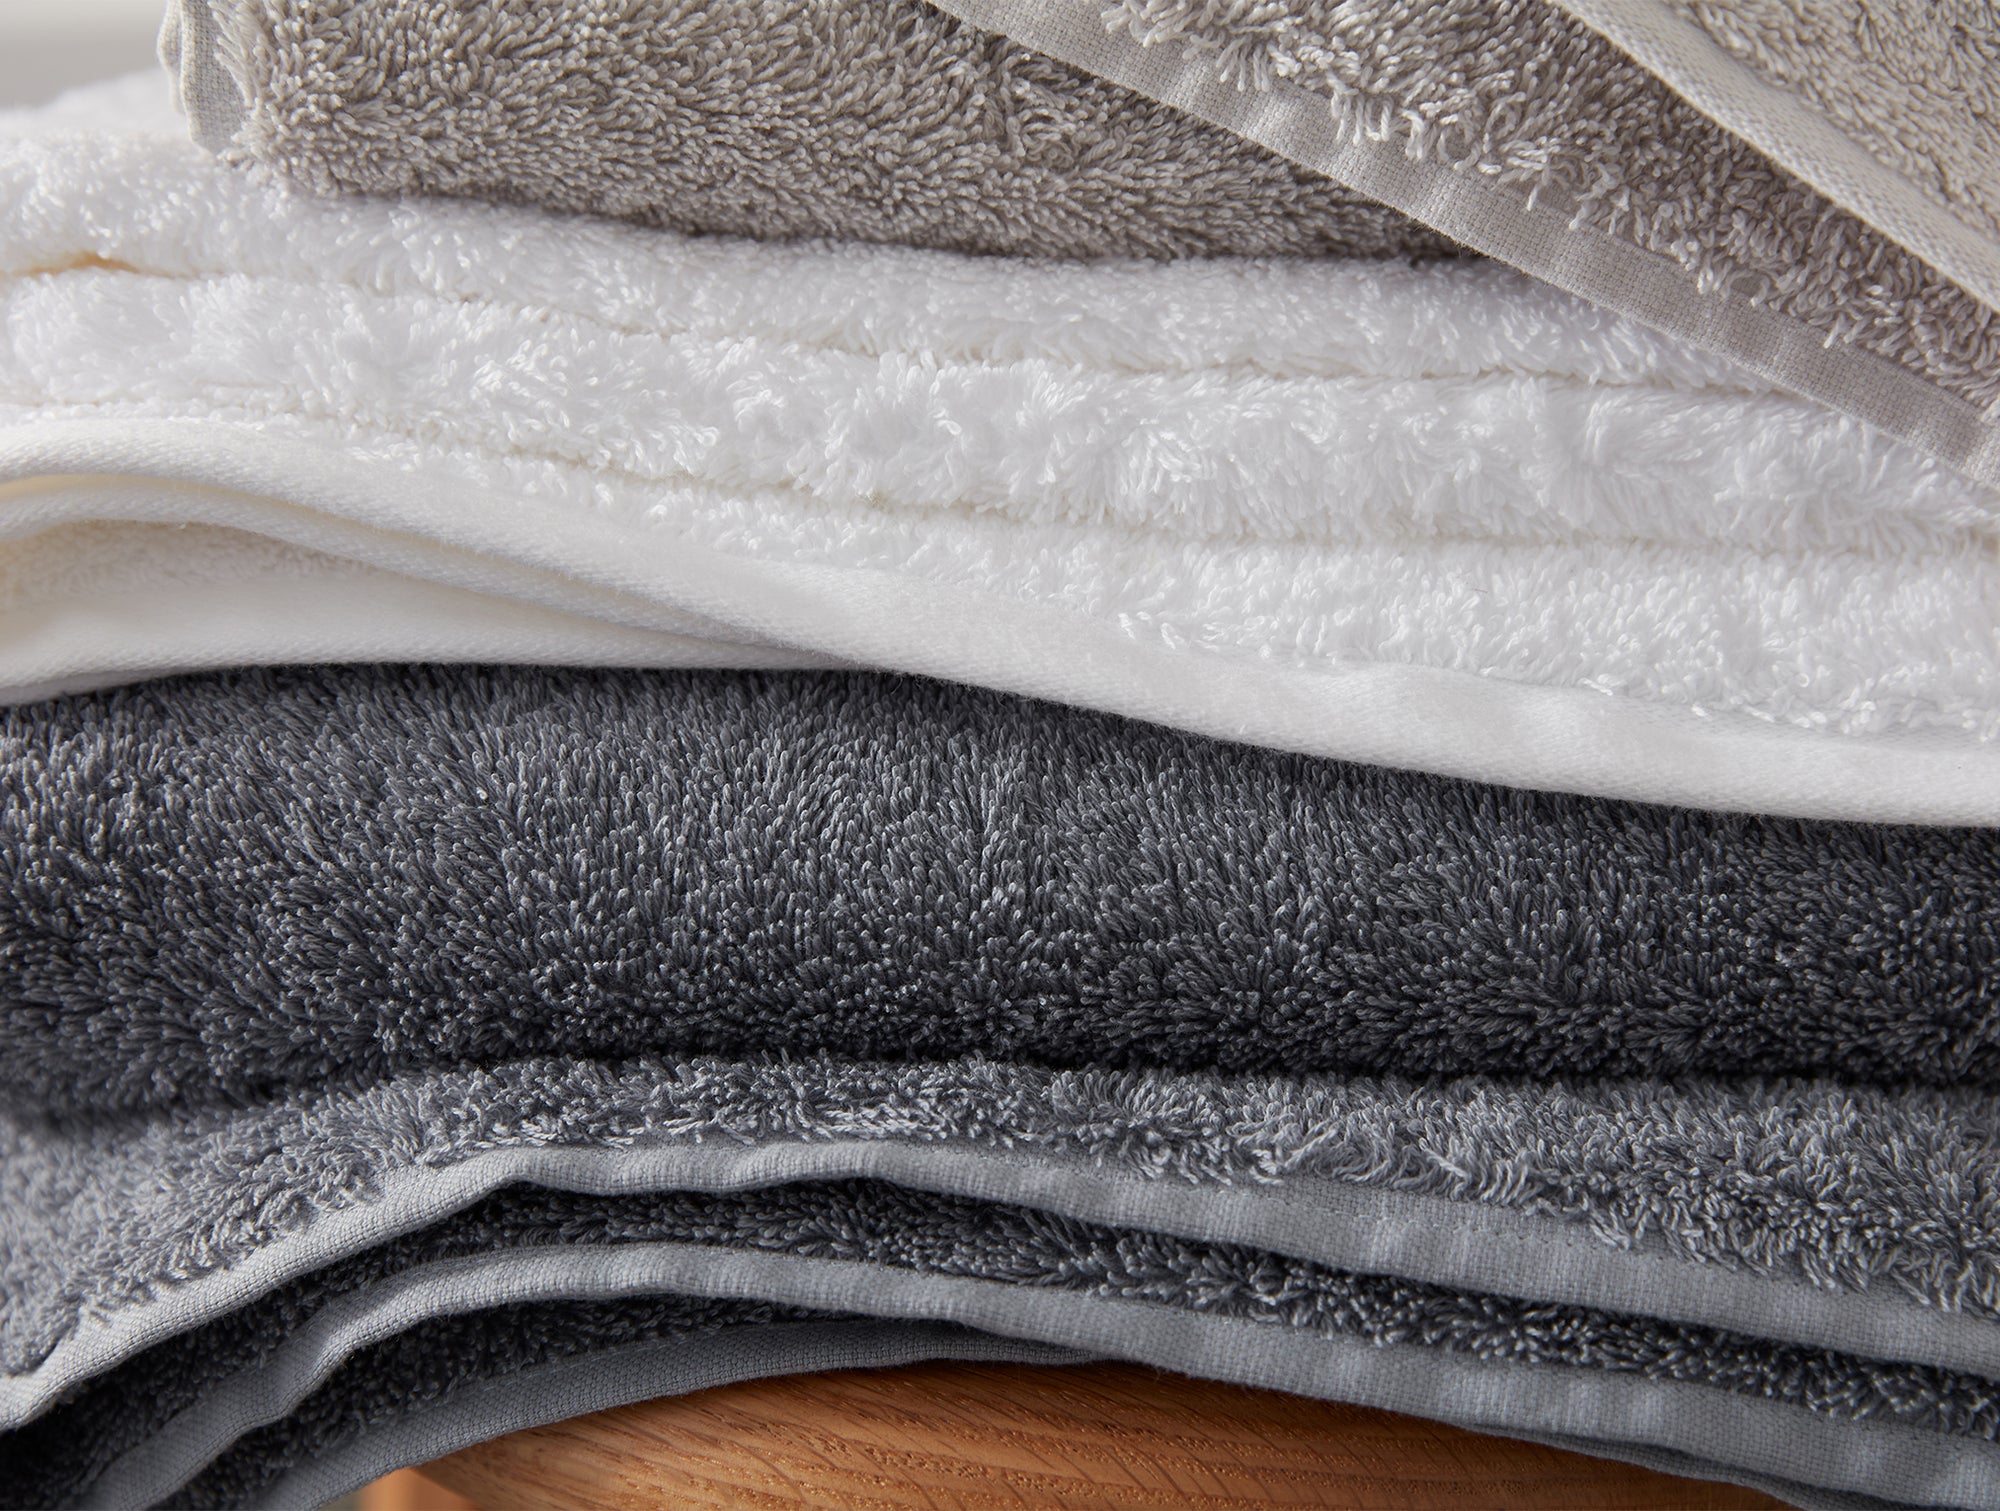 5 Tips for Buying Organic Bath Towels